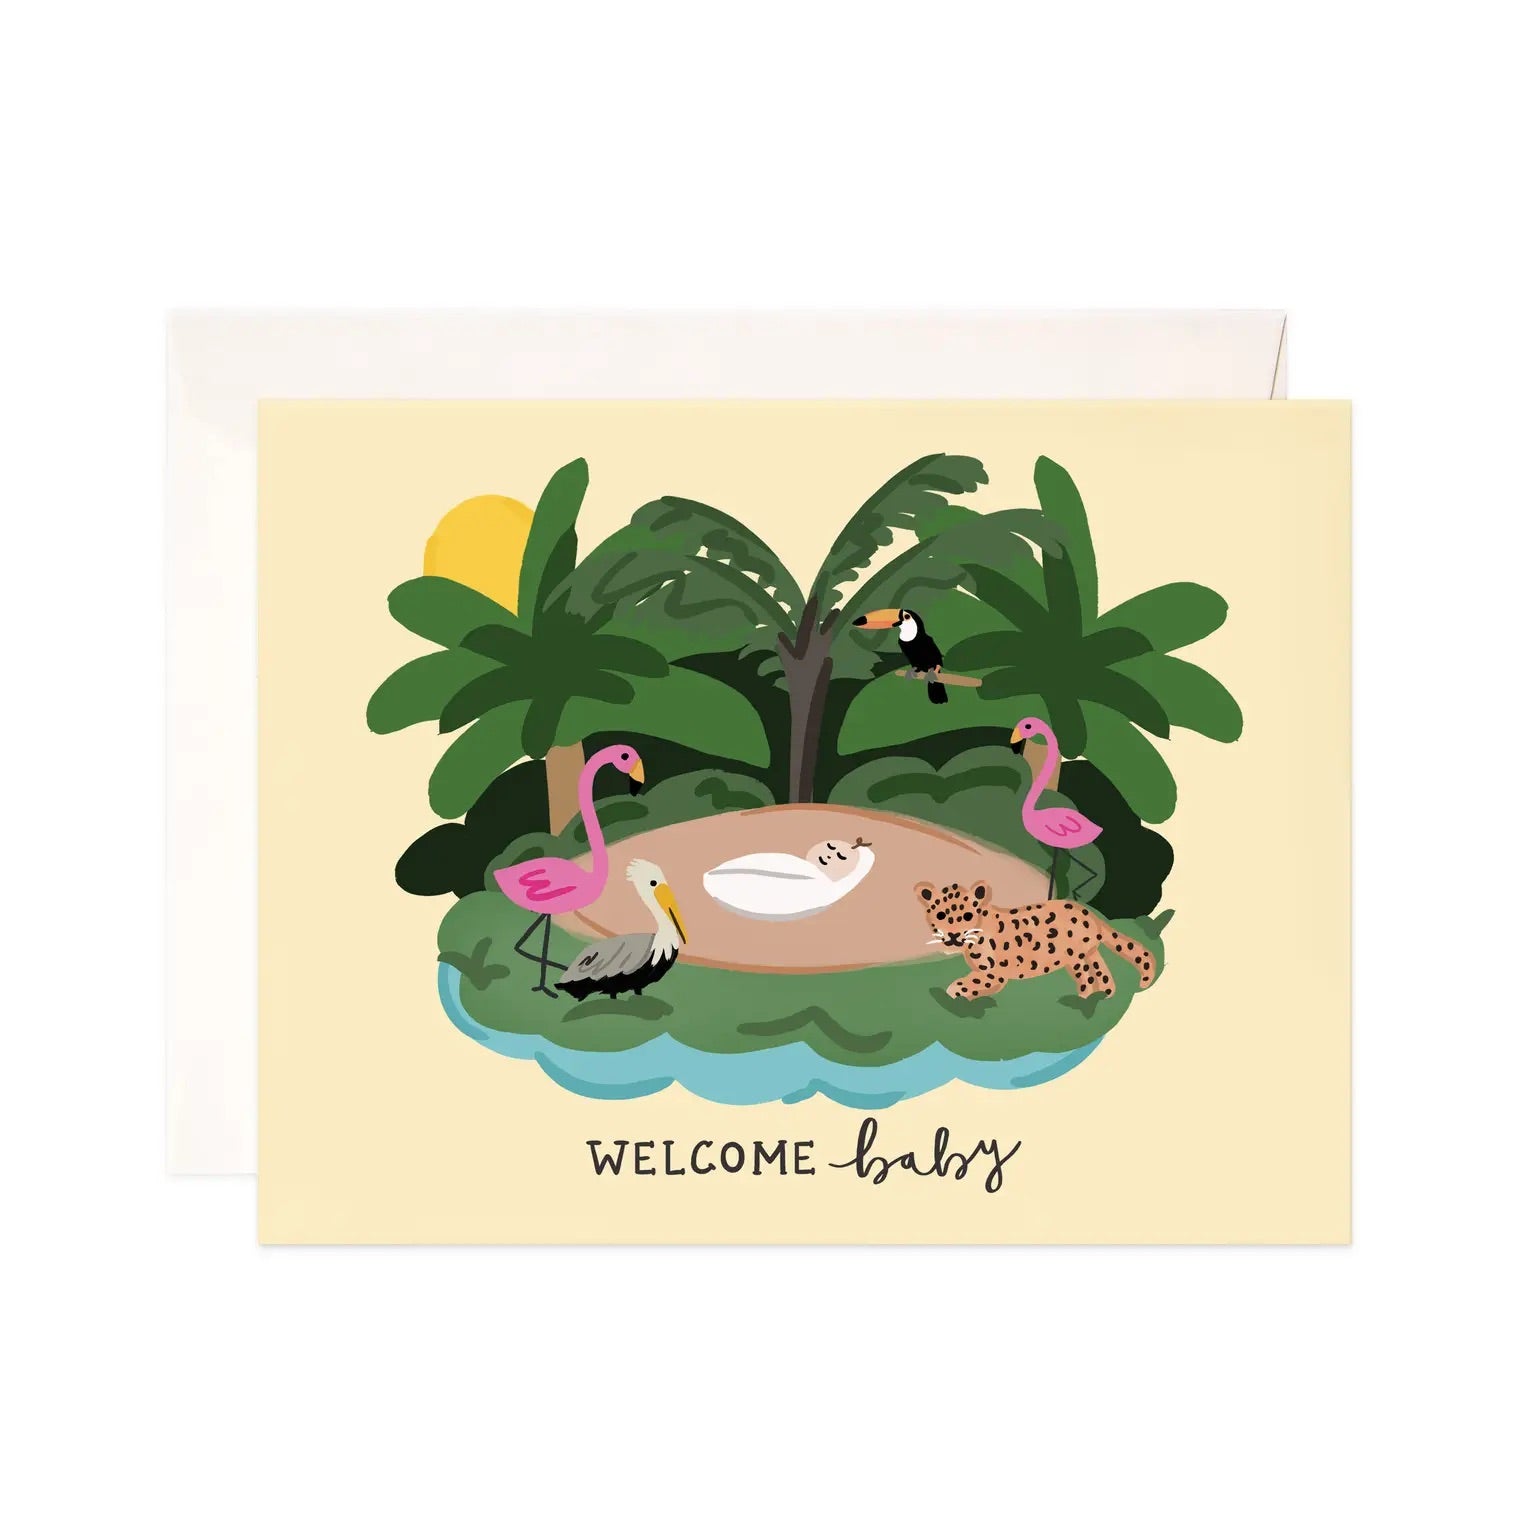 White card with a cream background. Jungle illustration with flamingos, birds, and a leopard visiting a baby. Black text says "welcome baby"